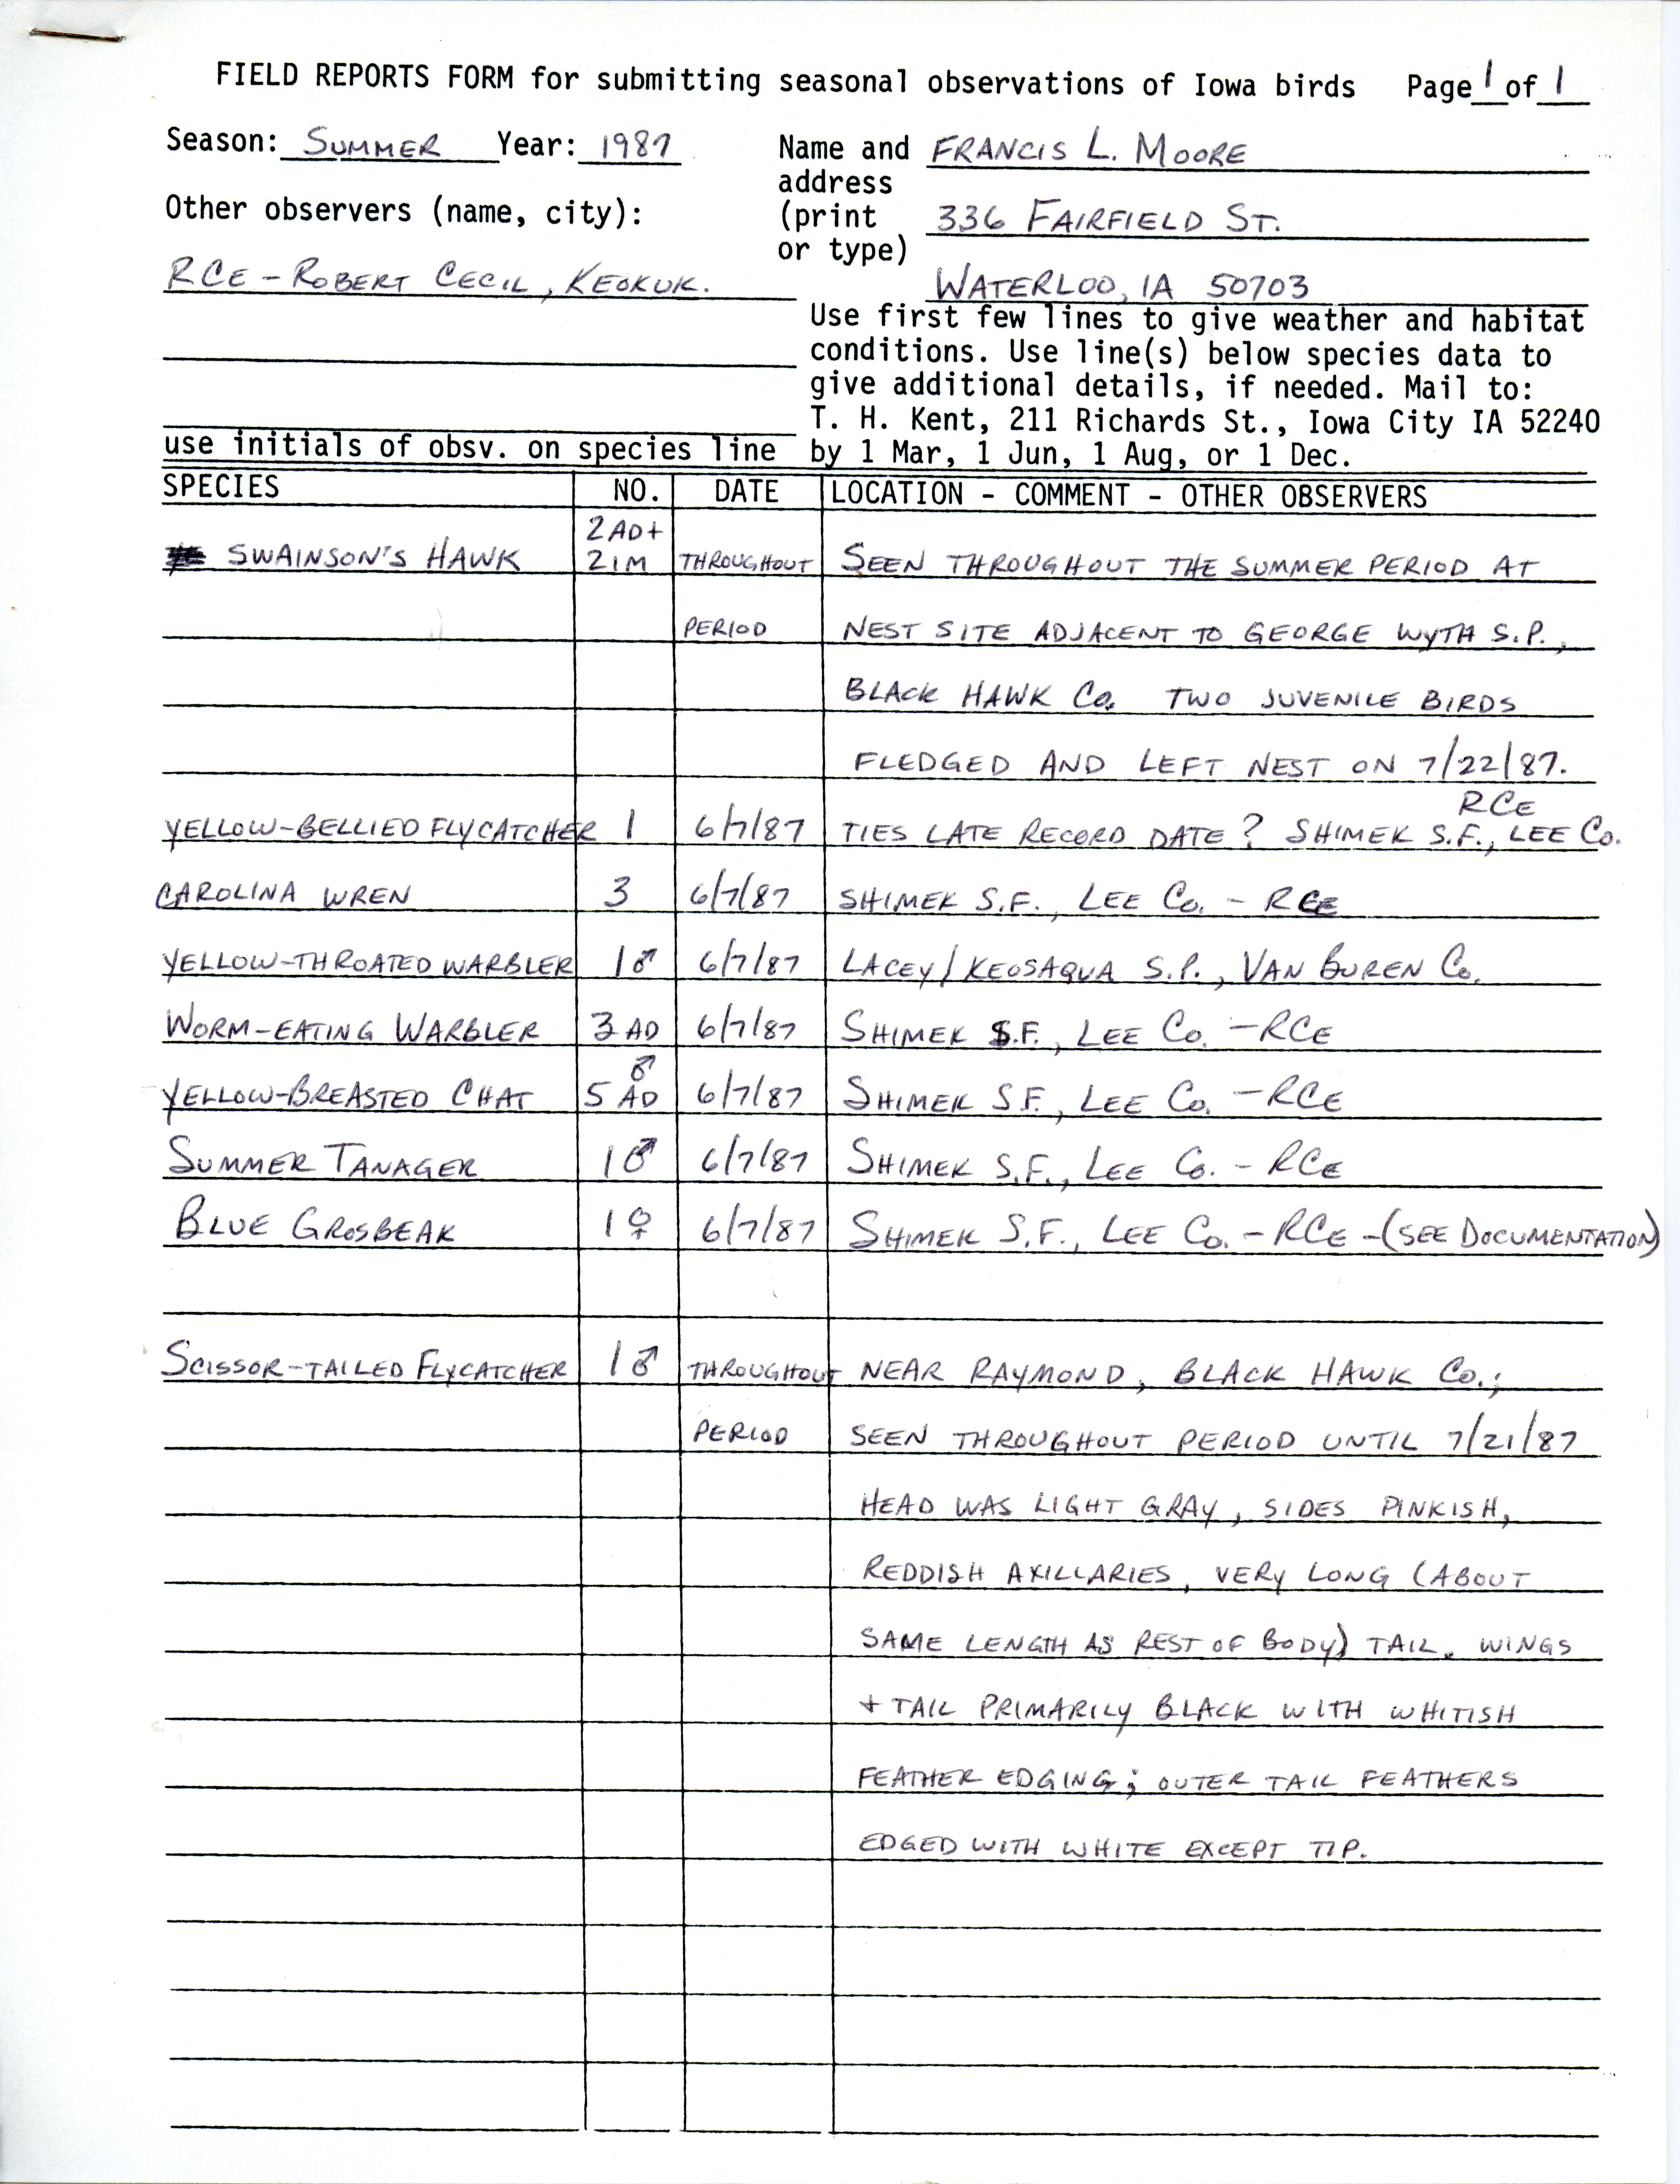 Field reports form for submitting seasonal observations of Iowa birds, Francis L. Moore, summer 1987